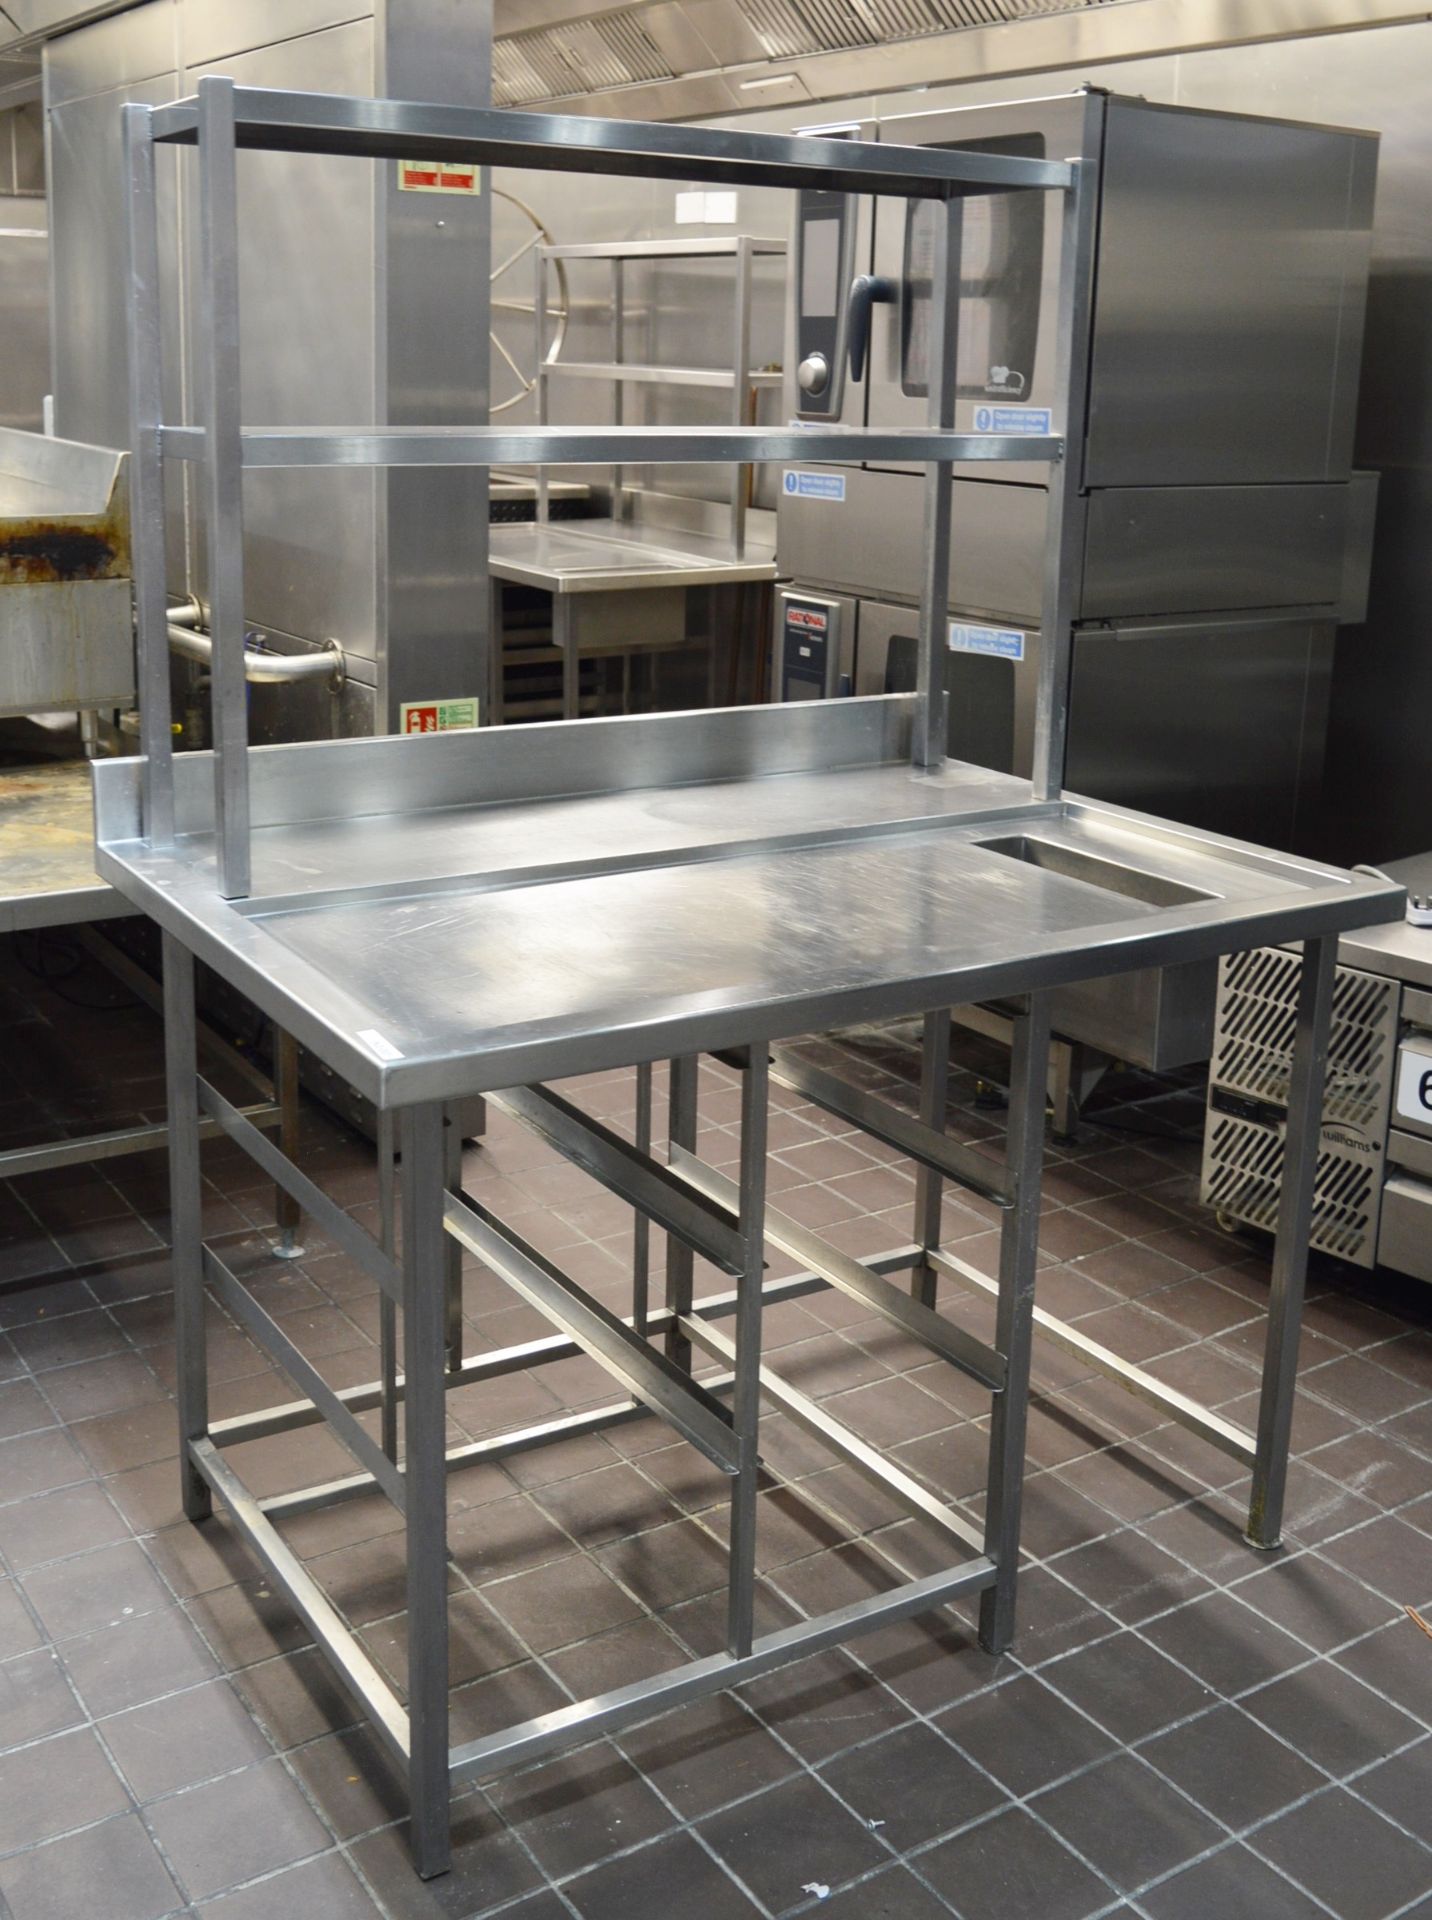 1 x Stainless Steel Prep Bench With Undercounter Shelves, Bin Chute and Overhead Shelves - H87/171 x